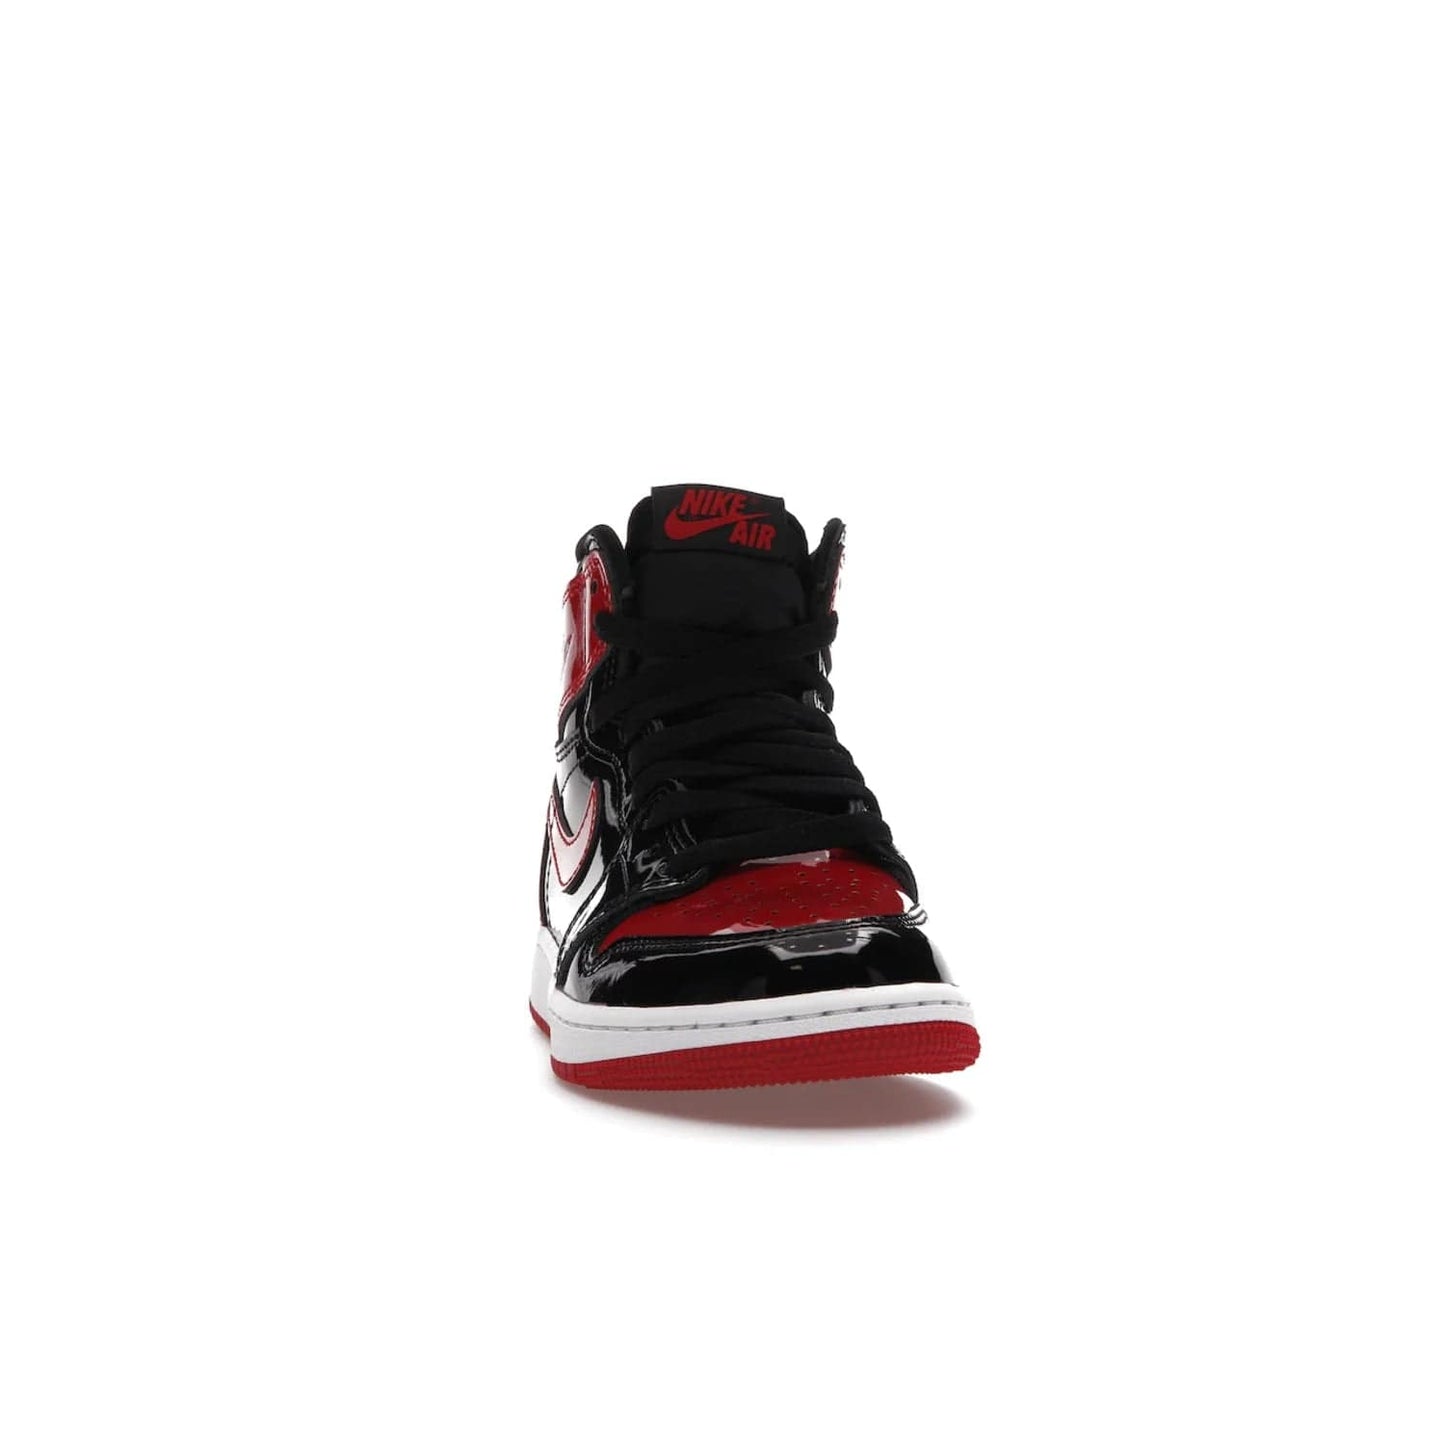 Jordan 1 Retro High OG Patent Bred (GS) - Image 9 - Only at www.BallersClubKickz.com - Upgrade your sneaker game with the iconic Air Jordan 1 Retro High OG Bred Patent GS. Crafted with premium patent leather and basketball-inspired details for a classic look, they also feature an encapsulated Air-sole cushioning and enhanced red rubber outsole. Don't miss this timeless sneaker with a striking black, white, and varsity red colorway, dropping December 2021.